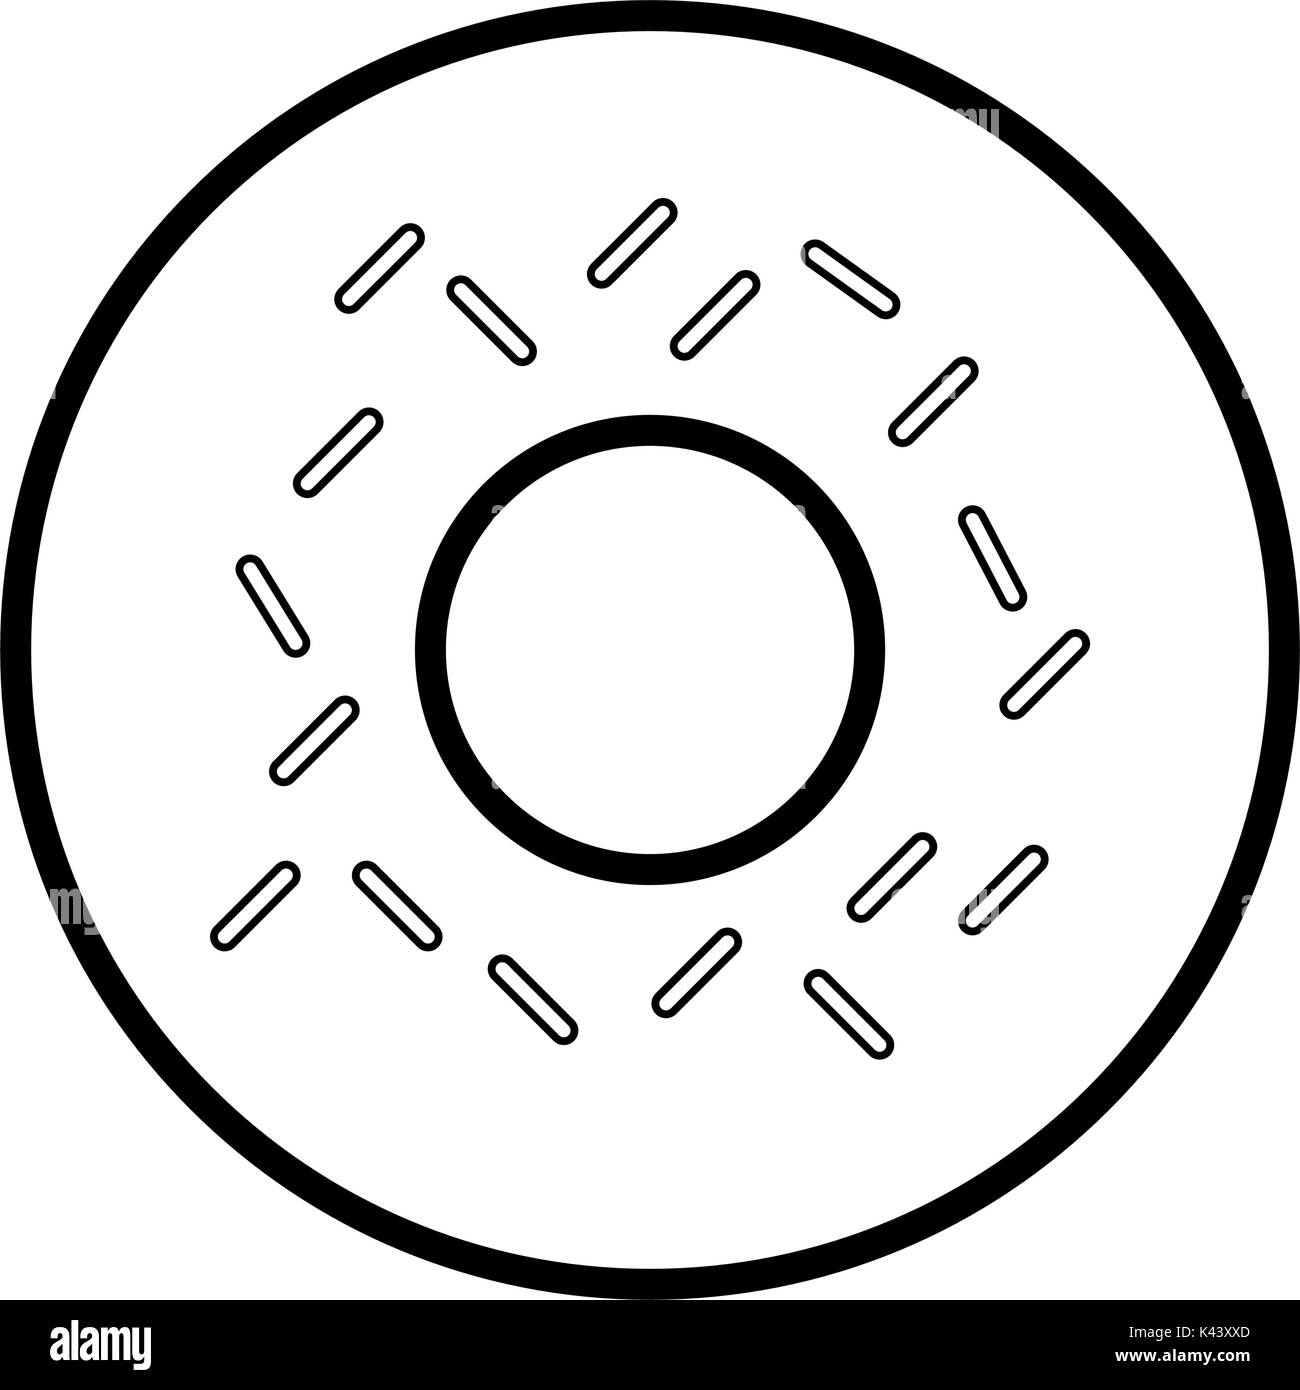 Clip art donut Black and White Stock Photos & Images - Alamy